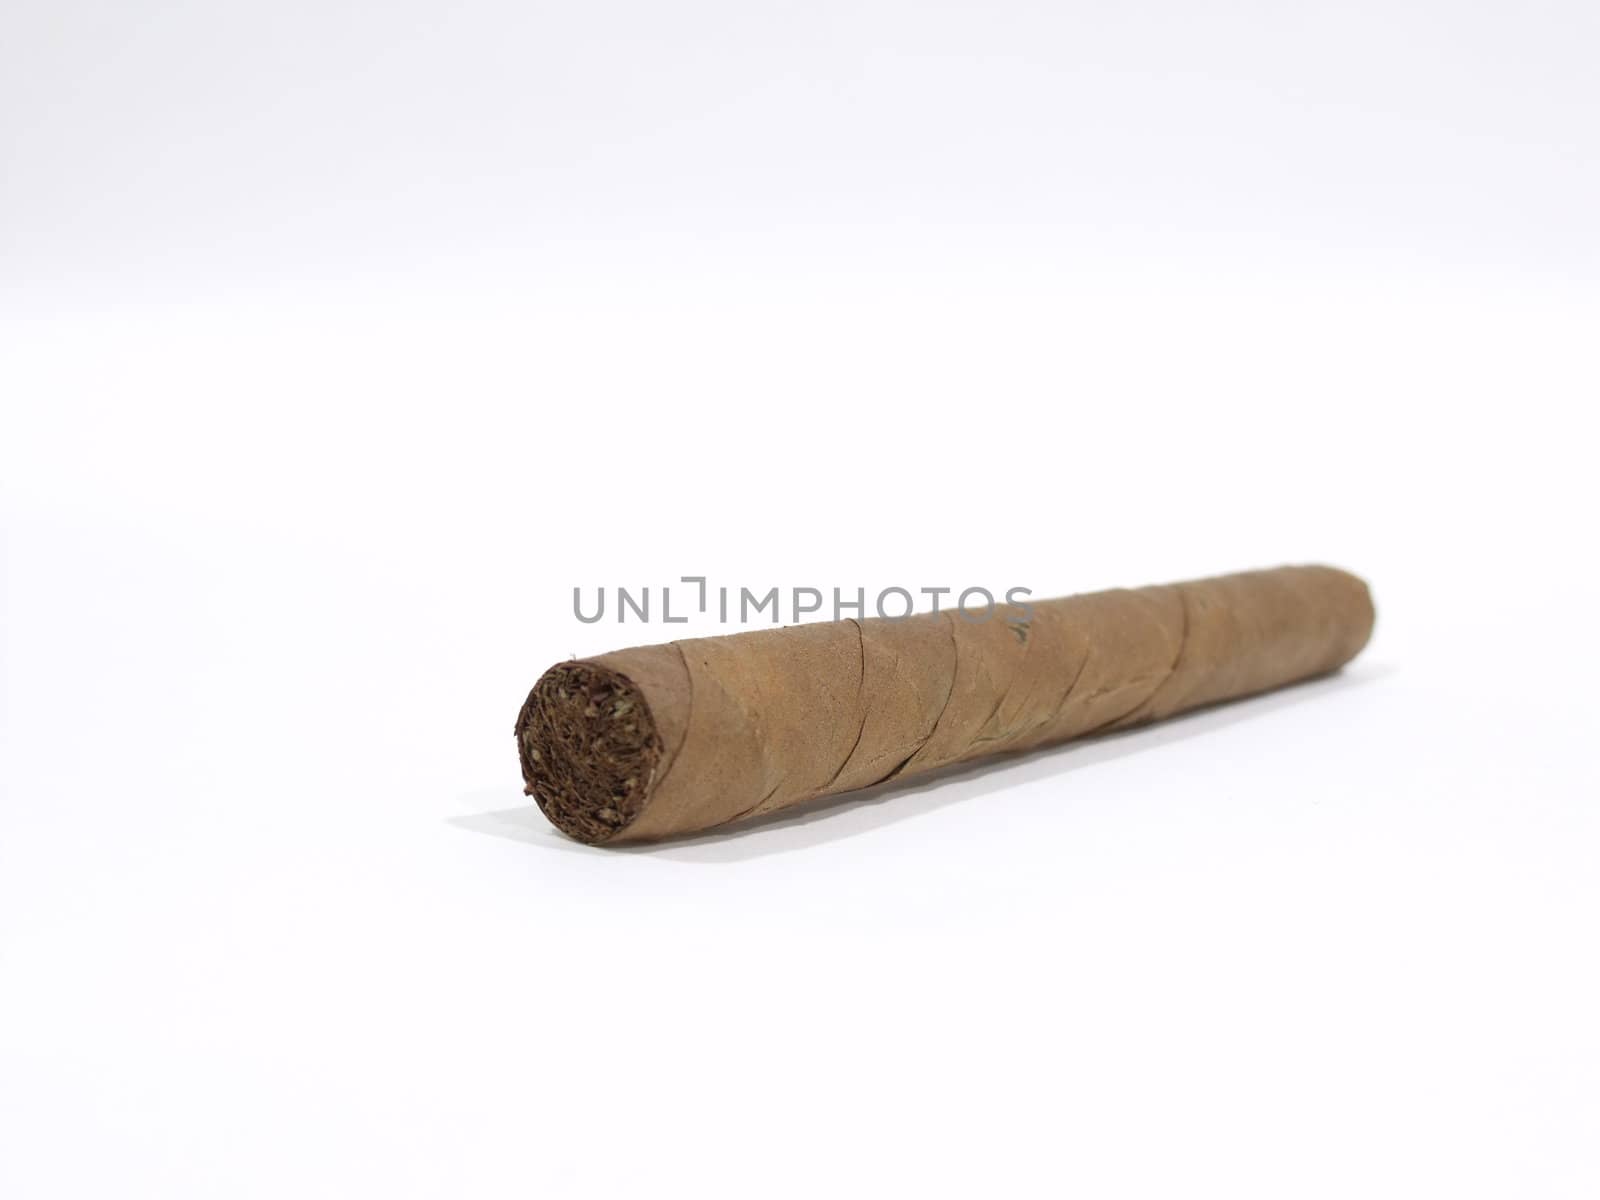 An isolated long wrapped cigar on a white surface